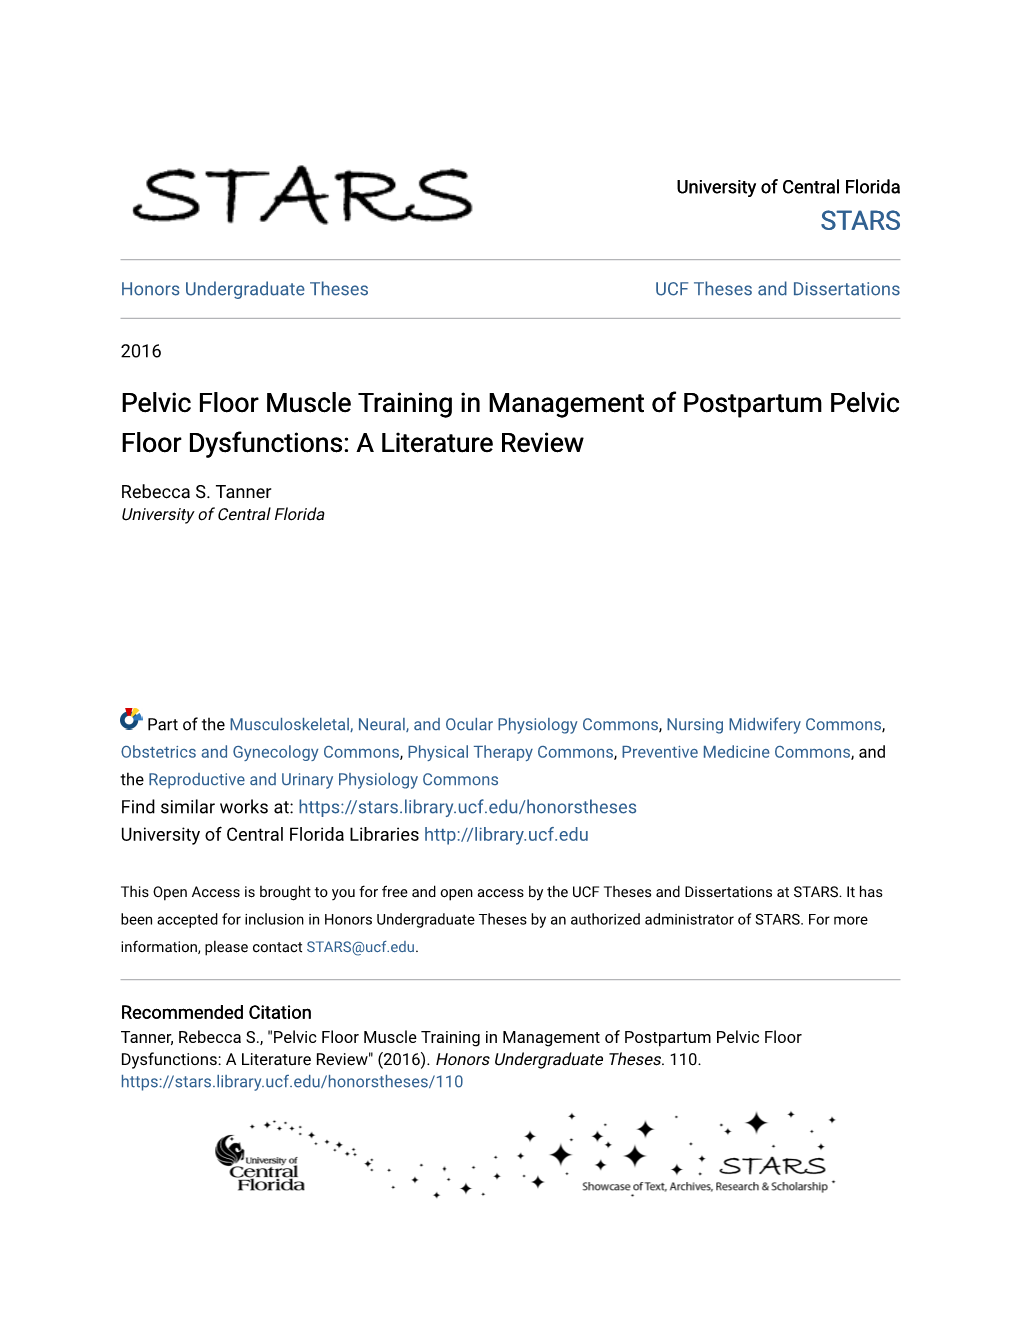 Pelvic Floor Muscle Training in Management of Postpartum Pelvic Floor Dysfunctions: a Literature Review